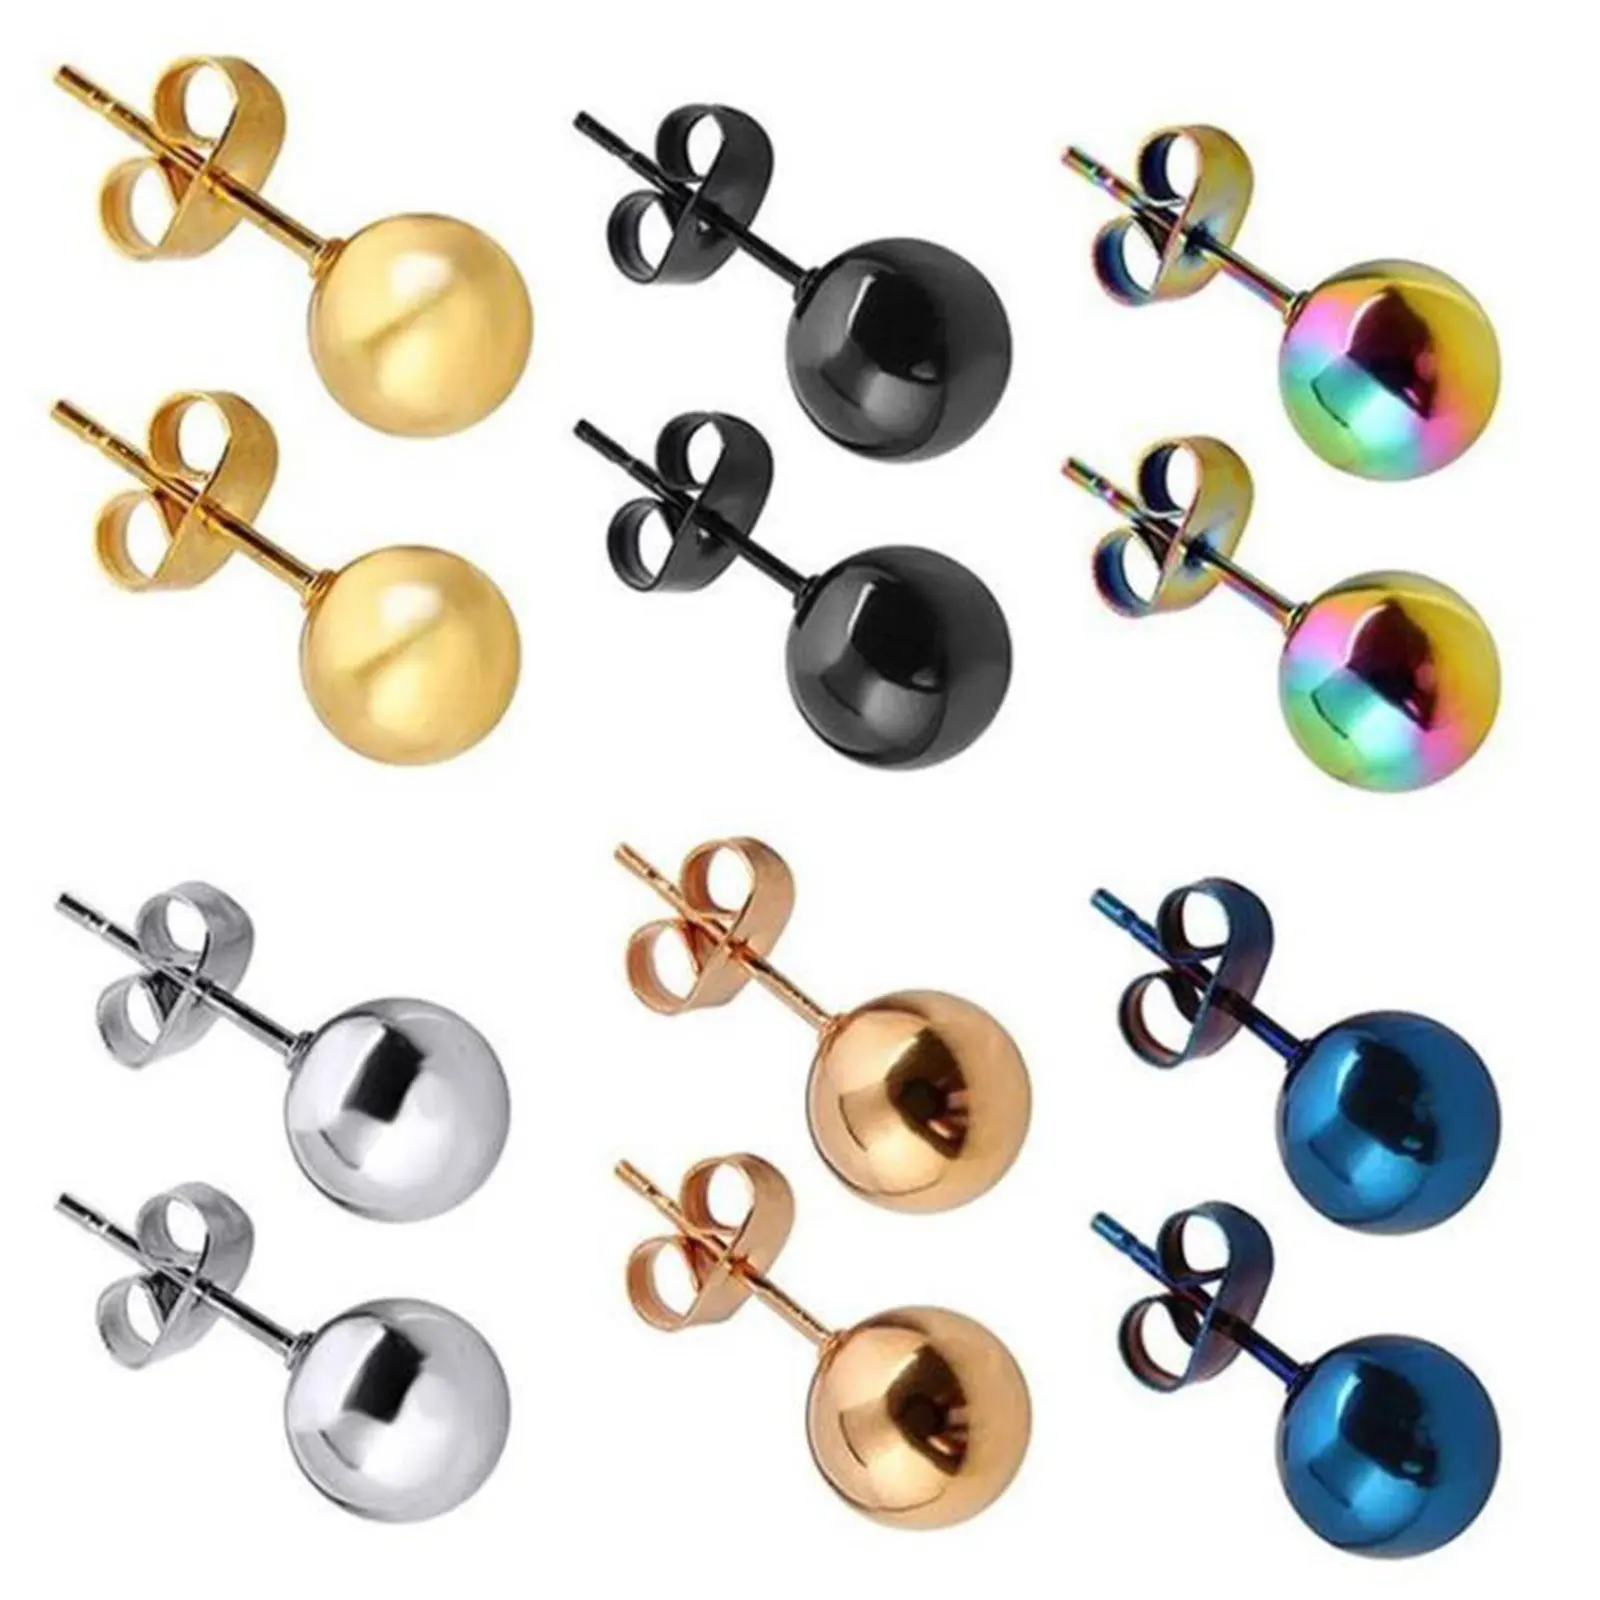 Stainless Steel Ear Post Stud Earrings For Women Men Jewelry Gold Silver Color Ball 2-8mm Dia Fashion Jewelry Wholesale, 1 Pair